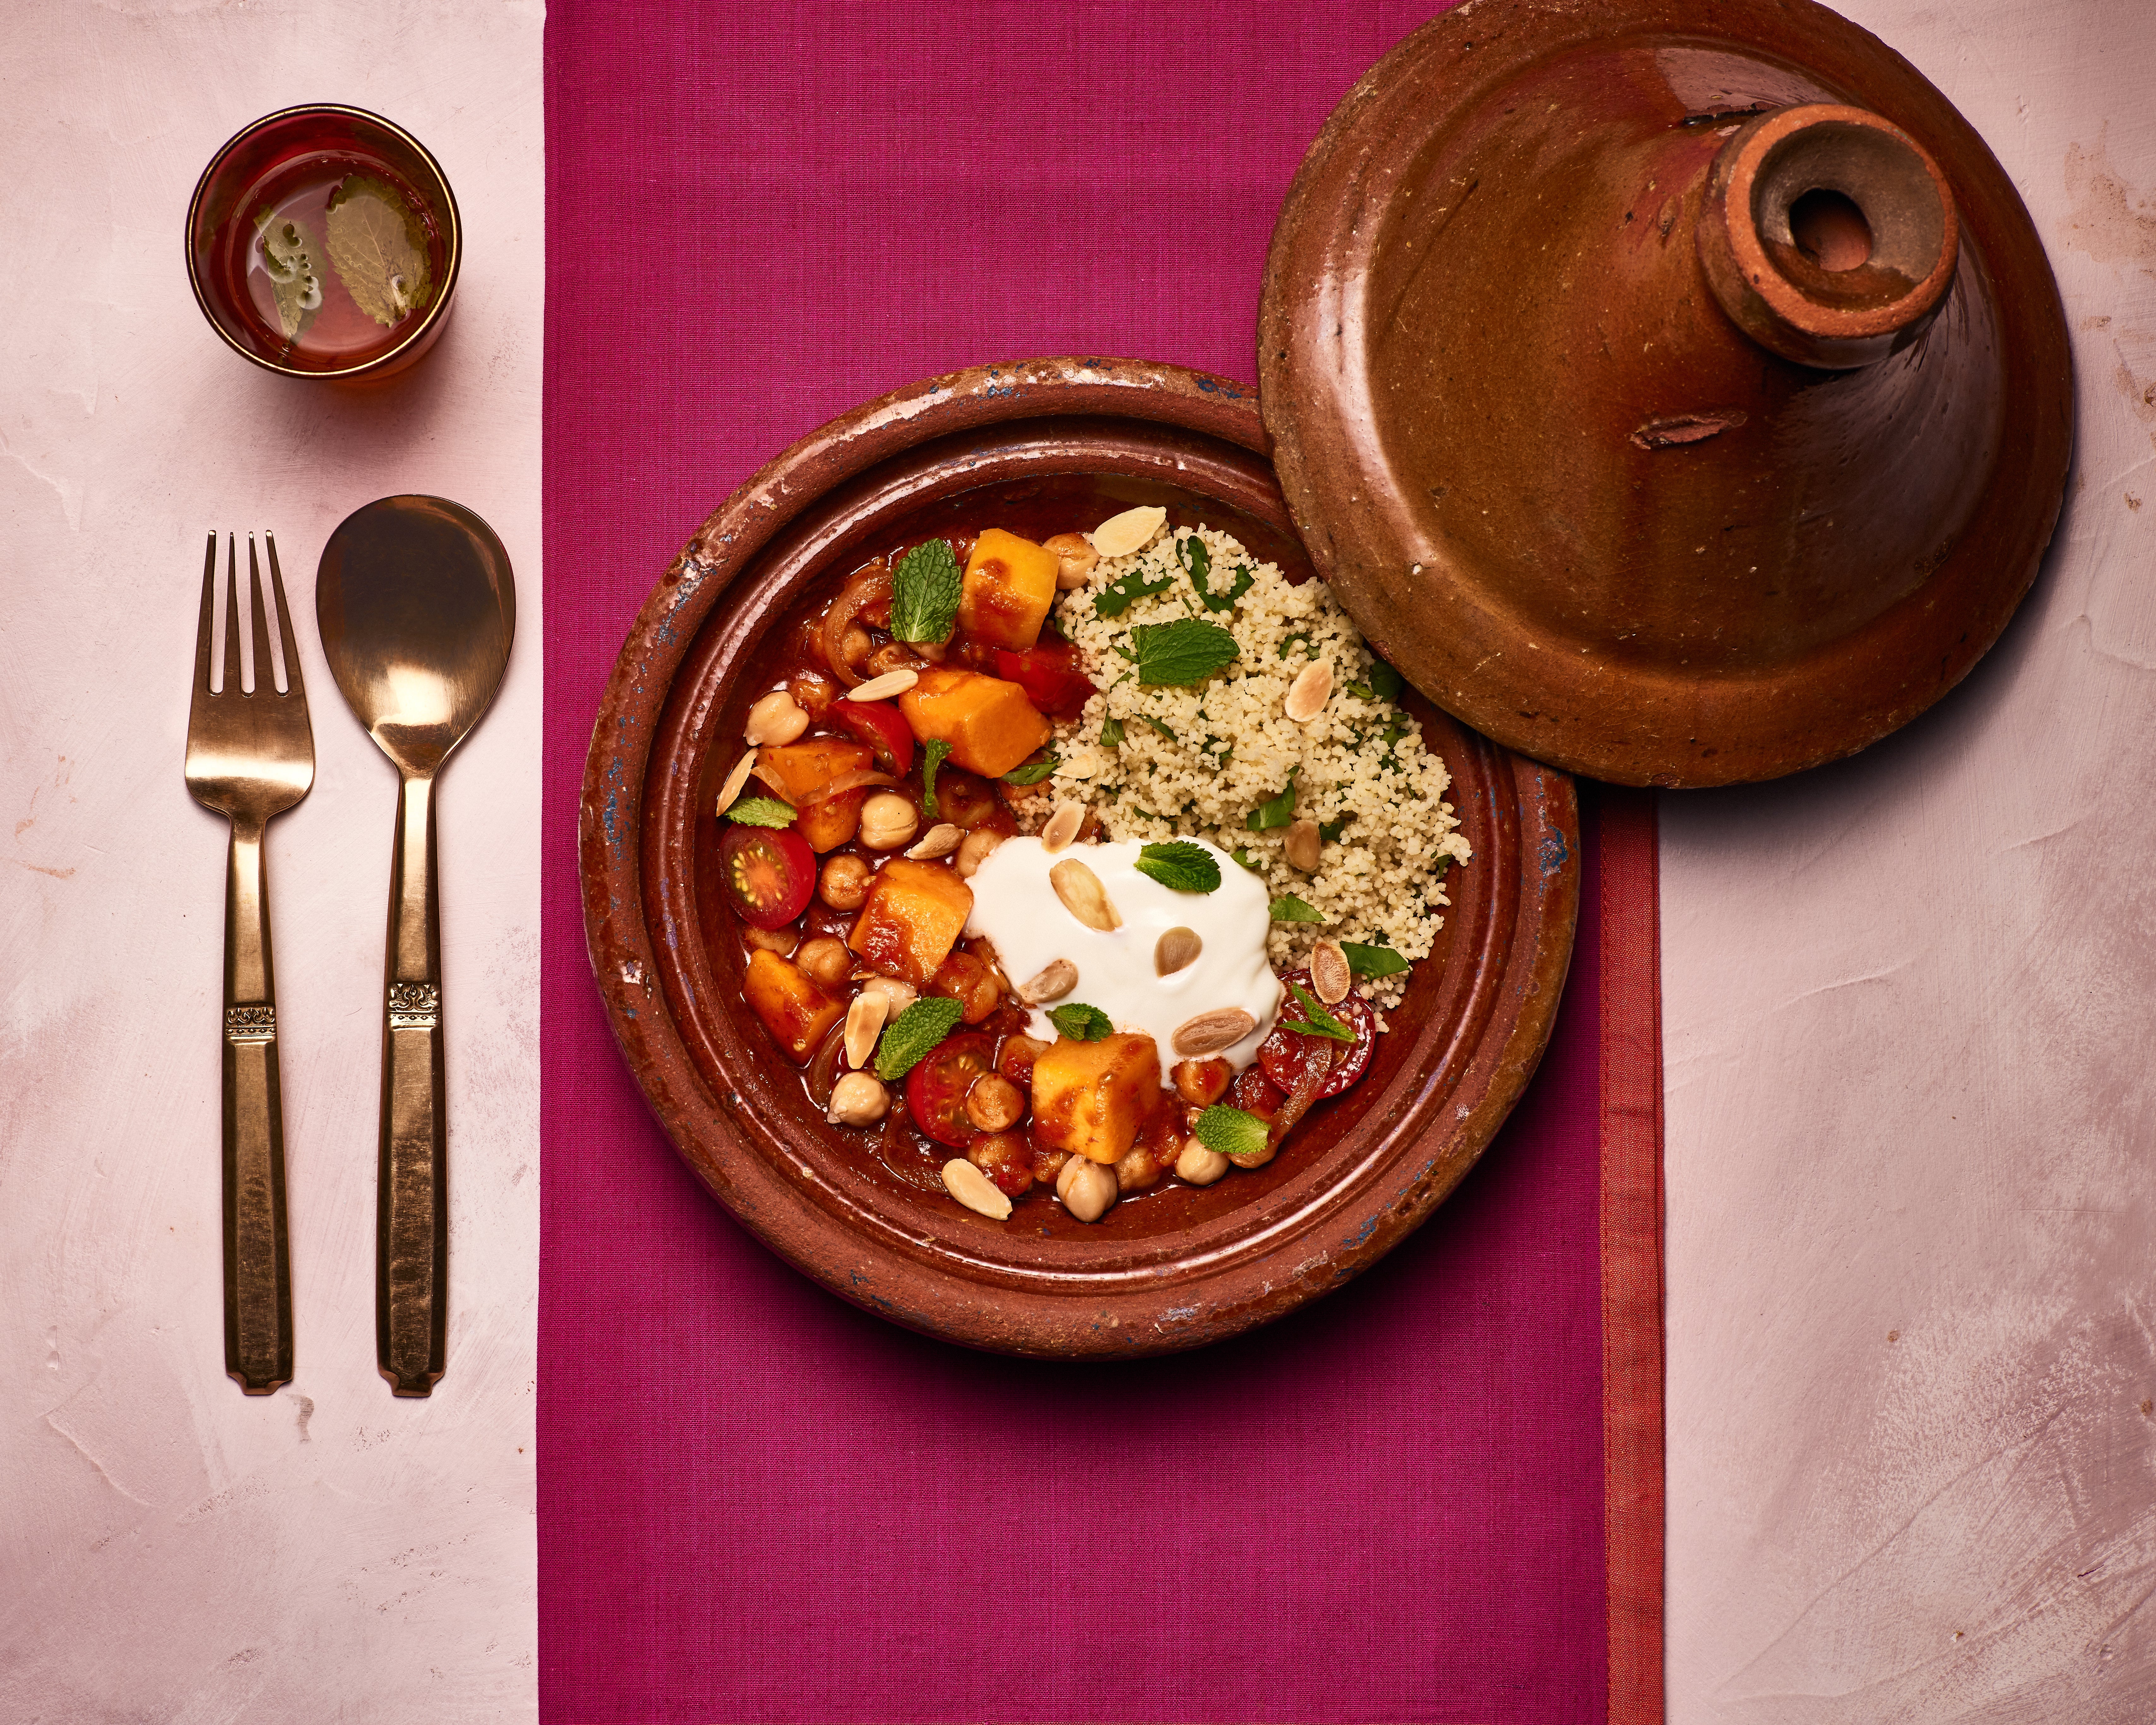 This wholesome tagine is filled with chickpeas and butternut squash